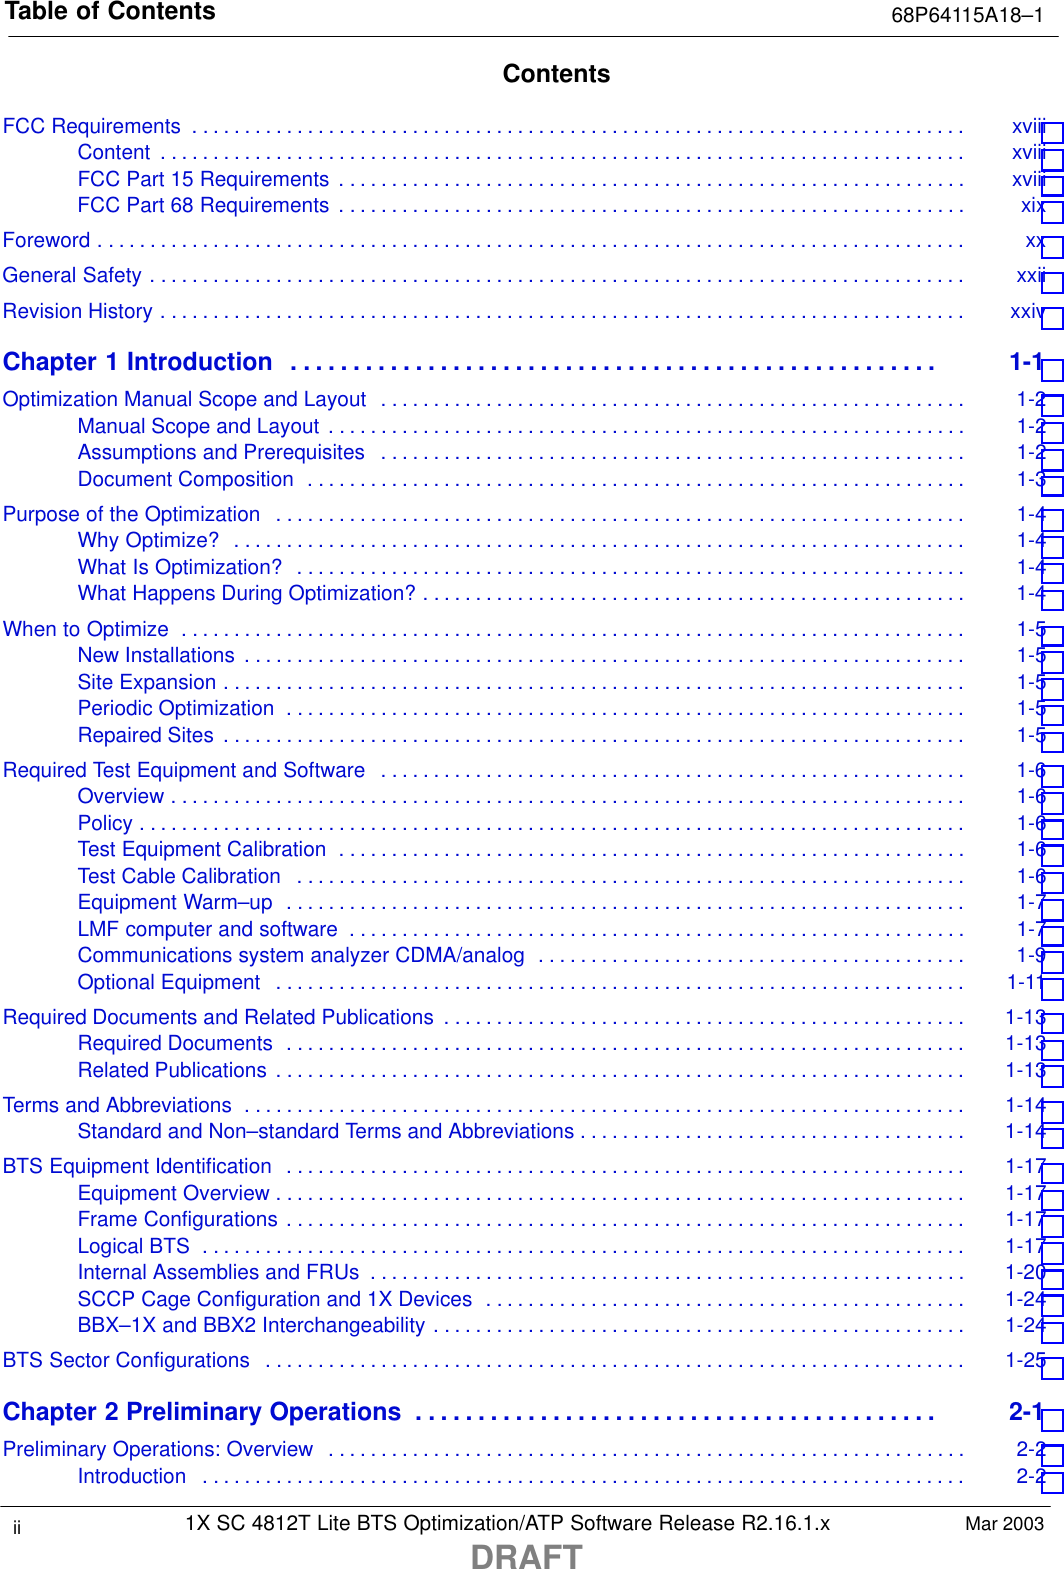 Table of Contents 68P64115A18–11X SC 4812T Lite BTS Optimization/ATP Software Release R2.16.1.xDRAFTii Mar 2003ContentsFCC Requirements xviii . . . . . . . . . . . . . . . . . . . . . . . . . . . . . . . . . . . . . . . . . . . . . . . . . . . . . . . . . . . . . . . . . . . . . . . . . . Content xviii . . . . . . . . . . . . . . . . . . . . . . . . . . . . . . . . . . . . . . . . . . . . . . . . . . . . . . . . . . . . . . . . . . . . . . . . . . . . . FCC Part 15 Requirements xviii . . . . . . . . . . . . . . . . . . . . . . . . . . . . . . . . . . . . . . . . . . . . . . . . . . . . . . . . . . . . FCC Part 68 Requirements xix . . . . . . . . . . . . . . . . . . . . . . . . . . . . . . . . . . . . . . . . . . . . . . . . . . . . . . . . . . . . Foreword xx . . . . . . . . . . . . . . . . . . . . . . . . . . . . . . . . . . . . . . . . . . . . . . . . . . . . . . . . . . . . . . . . . . . . . . . . . . . . . . . . . . . General Safety xxii . . . . . . . . . . . . . . . . . . . . . . . . . . . . . . . . . . . . . . . . . . . . . . . . . . . . . . . . . . . . . . . . . . . . . . . . . . . . . . Revision History xxiv . . . . . . . . . . . . . . . . . . . . . . . . . . . . . . . . . . . . . . . . . . . . . . . . . . . . . . . . . . . . . . . . . . . . . . . . . . . . . Chapter 1 Introduction 1-1 . . . . . . . . . . . . . . . . . . . . . . . . . . . . . . . . . . . . . . . . . . . . . . . . . . . . Optimization Manual Scope and Layout 1-2 . . . . . . . . . . . . . . . . . . . . . . . . . . . . . . . . . . . . . . . . . . . . . . . . . . . . . . . . Manual Scope and Layout 1-2 . . . . . . . . . . . . . . . . . . . . . . . . . . . . . . . . . . . . . . . . . . . . . . . . . . . . . . . . . . . . . Assumptions and Prerequisites 1-2 . . . . . . . . . . . . . . . . . . . . . . . . . . . . . . . . . . . . . . . . . . . . . . . . . . . . . . . . Document Composition 1-3 . . . . . . . . . . . . . . . . . . . . . . . . . . . . . . . . . . . . . . . . . . . . . . . . . . . . . . . . . . . . . . . Purpose of the Optimization 1-4 . . . . . . . . . . . . . . . . . . . . . . . . . . . . . . . . . . . . . . . . . . . . . . . . . . . . . . . . . . . . . . . . . . Why Optimize? 1-4 . . . . . . . . . . . . . . . . . . . . . . . . . . . . . . . . . . . . . . . . . . . . . . . . . . . . . . . . . . . . . . . . . . . . . . What Is Optimization? 1-4 . . . . . . . . . . . . . . . . . . . . . . . . . . . . . . . . . . . . . . . . . . . . . . . . . . . . . . . . . . . . . . . . What Happens During Optimization? 1-4 . . . . . . . . . . . . . . . . . . . . . . . . . . . . . . . . . . . . . . . . . . . . . . . . . . . . When to Optimize 1-5 . . . . . . . . . . . . . . . . . . . . . . . . . . . . . . . . . . . . . . . . . . . . . . . . . . . . . . . . . . . . . . . . . . . . . . . . . . . New Installations 1-5 . . . . . . . . . . . . . . . . . . . . . . . . . . . . . . . . . . . . . . . . . . . . . . . . . . . . . . . . . . . . . . . . . . . . . Site Expansion 1-5 . . . . . . . . . . . . . . . . . . . . . . . . . . . . . . . . . . . . . . . . . . . . . . . . . . . . . . . . . . . . . . . . . . . . . . . Periodic Optimization 1-5 . . . . . . . . . . . . . . . . . . . . . . . . . . . . . . . . . . . . . . . . . . . . . . . . . . . . . . . . . . . . . . . . . Repaired Sites 1-5 . . . . . . . . . . . . . . . . . . . . . . . . . . . . . . . . . . . . . . . . . . . . . . . . . . . . . . . . . . . . . . . . . . . . . . . Required Test Equipment and Software 1-6 . . . . . . . . . . . . . . . . . . . . . . . . . . . . . . . . . . . . . . . . . . . . . . . . . . . . . . . . Overview 1-6 . . . . . . . . . . . . . . . . . . . . . . . . . . . . . . . . . . . . . . . . . . . . . . . . . . . . . . . . . . . . . . . . . . . . . . . . . . . . Policy 1-6 . . . . . . . . . . . . . . . . . . . . . . . . . . . . . . . . . . . . . . . . . . . . . . . . . . . . . . . . . . . . . . . . . . . . . . . . . . . . . . . Test Equipment Calibration 1-6 . . . . . . . . . . . . . . . . . . . . . . . . . . . . . . . . . . . . . . . . . . . . . . . . . . . . . . . . . . . . Test Cable Calibration 1-6 . . . . . . . . . . . . . . . . . . . . . . . . . . . . . . . . . . . . . . . . . . . . . . . . . . . . . . . . . . . . . . . . Equipment Warm–up 1-7 . . . . . . . . . . . . . . . . . . . . . . . . . . . . . . . . . . . . . . . . . . . . . . . . . . . . . . . . . . . . . . . . . LMF computer and software 1-7 . . . . . . . . . . . . . . . . . . . . . . . . . . . . . . . . . . . . . . . . . . . . . . . . . . . . . . . . . . . Communications system analyzer CDMA/analog 1-9 . . . . . . . . . . . . . . . . . . . . . . . . . . . . . . . . . . . . . . . . . Optional Equipment 1-11 . . . . . . . . . . . . . . . . . . . . . . . . . . . . . . . . . . . . . . . . . . . . . . . . . . . . . . . . . . . . . . . . . . Required Documents and Related Publications 1-13 . . . . . . . . . . . . . . . . . . . . . . . . . . . . . . . . . . . . . . . . . . . . . . . . . . Required Documents 1-13 . . . . . . . . . . . . . . . . . . . . . . . . . . . . . . . . . . . . . . . . . . . . . . . . . . . . . . . . . . . . . . . . . Related Publications 1-13 . . . . . . . . . . . . . . . . . . . . . . . . . . . . . . . . . . . . . . . . . . . . . . . . . . . . . . . . . . . . . . . . . . Terms and Abbreviations 1-14 . . . . . . . . . . . . . . . . . . . . . . . . . . . . . . . . . . . . . . . . . . . . . . . . . . . . . . . . . . . . . . . . . . . . . Standard and Non–standard Terms and Abbreviations 1-14 . . . . . . . . . . . . . . . . . . . . . . . . . . . . . . . . . . . . . BTS Equipment Identification 1-17 . . . . . . . . . . . . . . . . . . . . . . . . . . . . . . . . . . . . . . . . . . . . . . . . . . . . . . . . . . . . . . . . . Equipment Overview 1-17 . . . . . . . . . . . . . . . . . . . . . . . . . . . . . . . . . . . . . . . . . . . . . . . . . . . . . . . . . . . . . . . . . . Frame Configurations 1-17 . . . . . . . . . . . . . . . . . . . . . . . . . . . . . . . . . . . . . . . . . . . . . . . . . . . . . . . . . . . . . . . . . Logical BTS 1-17 . . . . . . . . . . . . . . . . . . . . . . . . . . . . . . . . . . . . . . . . . . . . . . . . . . . . . . . . . . . . . . . . . . . . . . . . . Internal Assemblies and FRUs 1-20 . . . . . . . . . . . . . . . . . . . . . . . . . . . . . . . . . . . . . . . . . . . . . . . . . . . . . . . . . SCCP Cage Configuration and 1X Devices 1-24 . . . . . . . . . . . . . . . . . . . . . . . . . . . . . . . . . . . . . . . . . . . . . . BBX–1X and BBX2 Interchangeability 1-24 . . . . . . . . . . . . . . . . . . . . . . . . . . . . . . . . . . . . . . . . . . . . . . . . . . . BTS Sector Configurations 1-25 . . . . . . . . . . . . . . . . . . . . . . . . . . . . . . . . . . . . . . . . . . . . . . . . . . . . . . . . . . . . . . . . . . . Chapter 2 Preliminary Operations 2-1 . . . . . . . . . . . . . . . . . . . . . . . . . . . . . . . . . . . . . . . . . . Preliminary Operations: Overview 2-2 . . . . . . . . . . . . . . . . . . . . . . . . . . . . . . . . . . . . . . . . . . . . . . . . . . . . . . . . . . . . . Introduction 2-2 . . . . . . . . . . . . . . . . . . . . . . . . . . . . . . . . . . . . . . . . . . . . . . . . . . . . . . . . . . . . . . . . . . . . . . . . . 